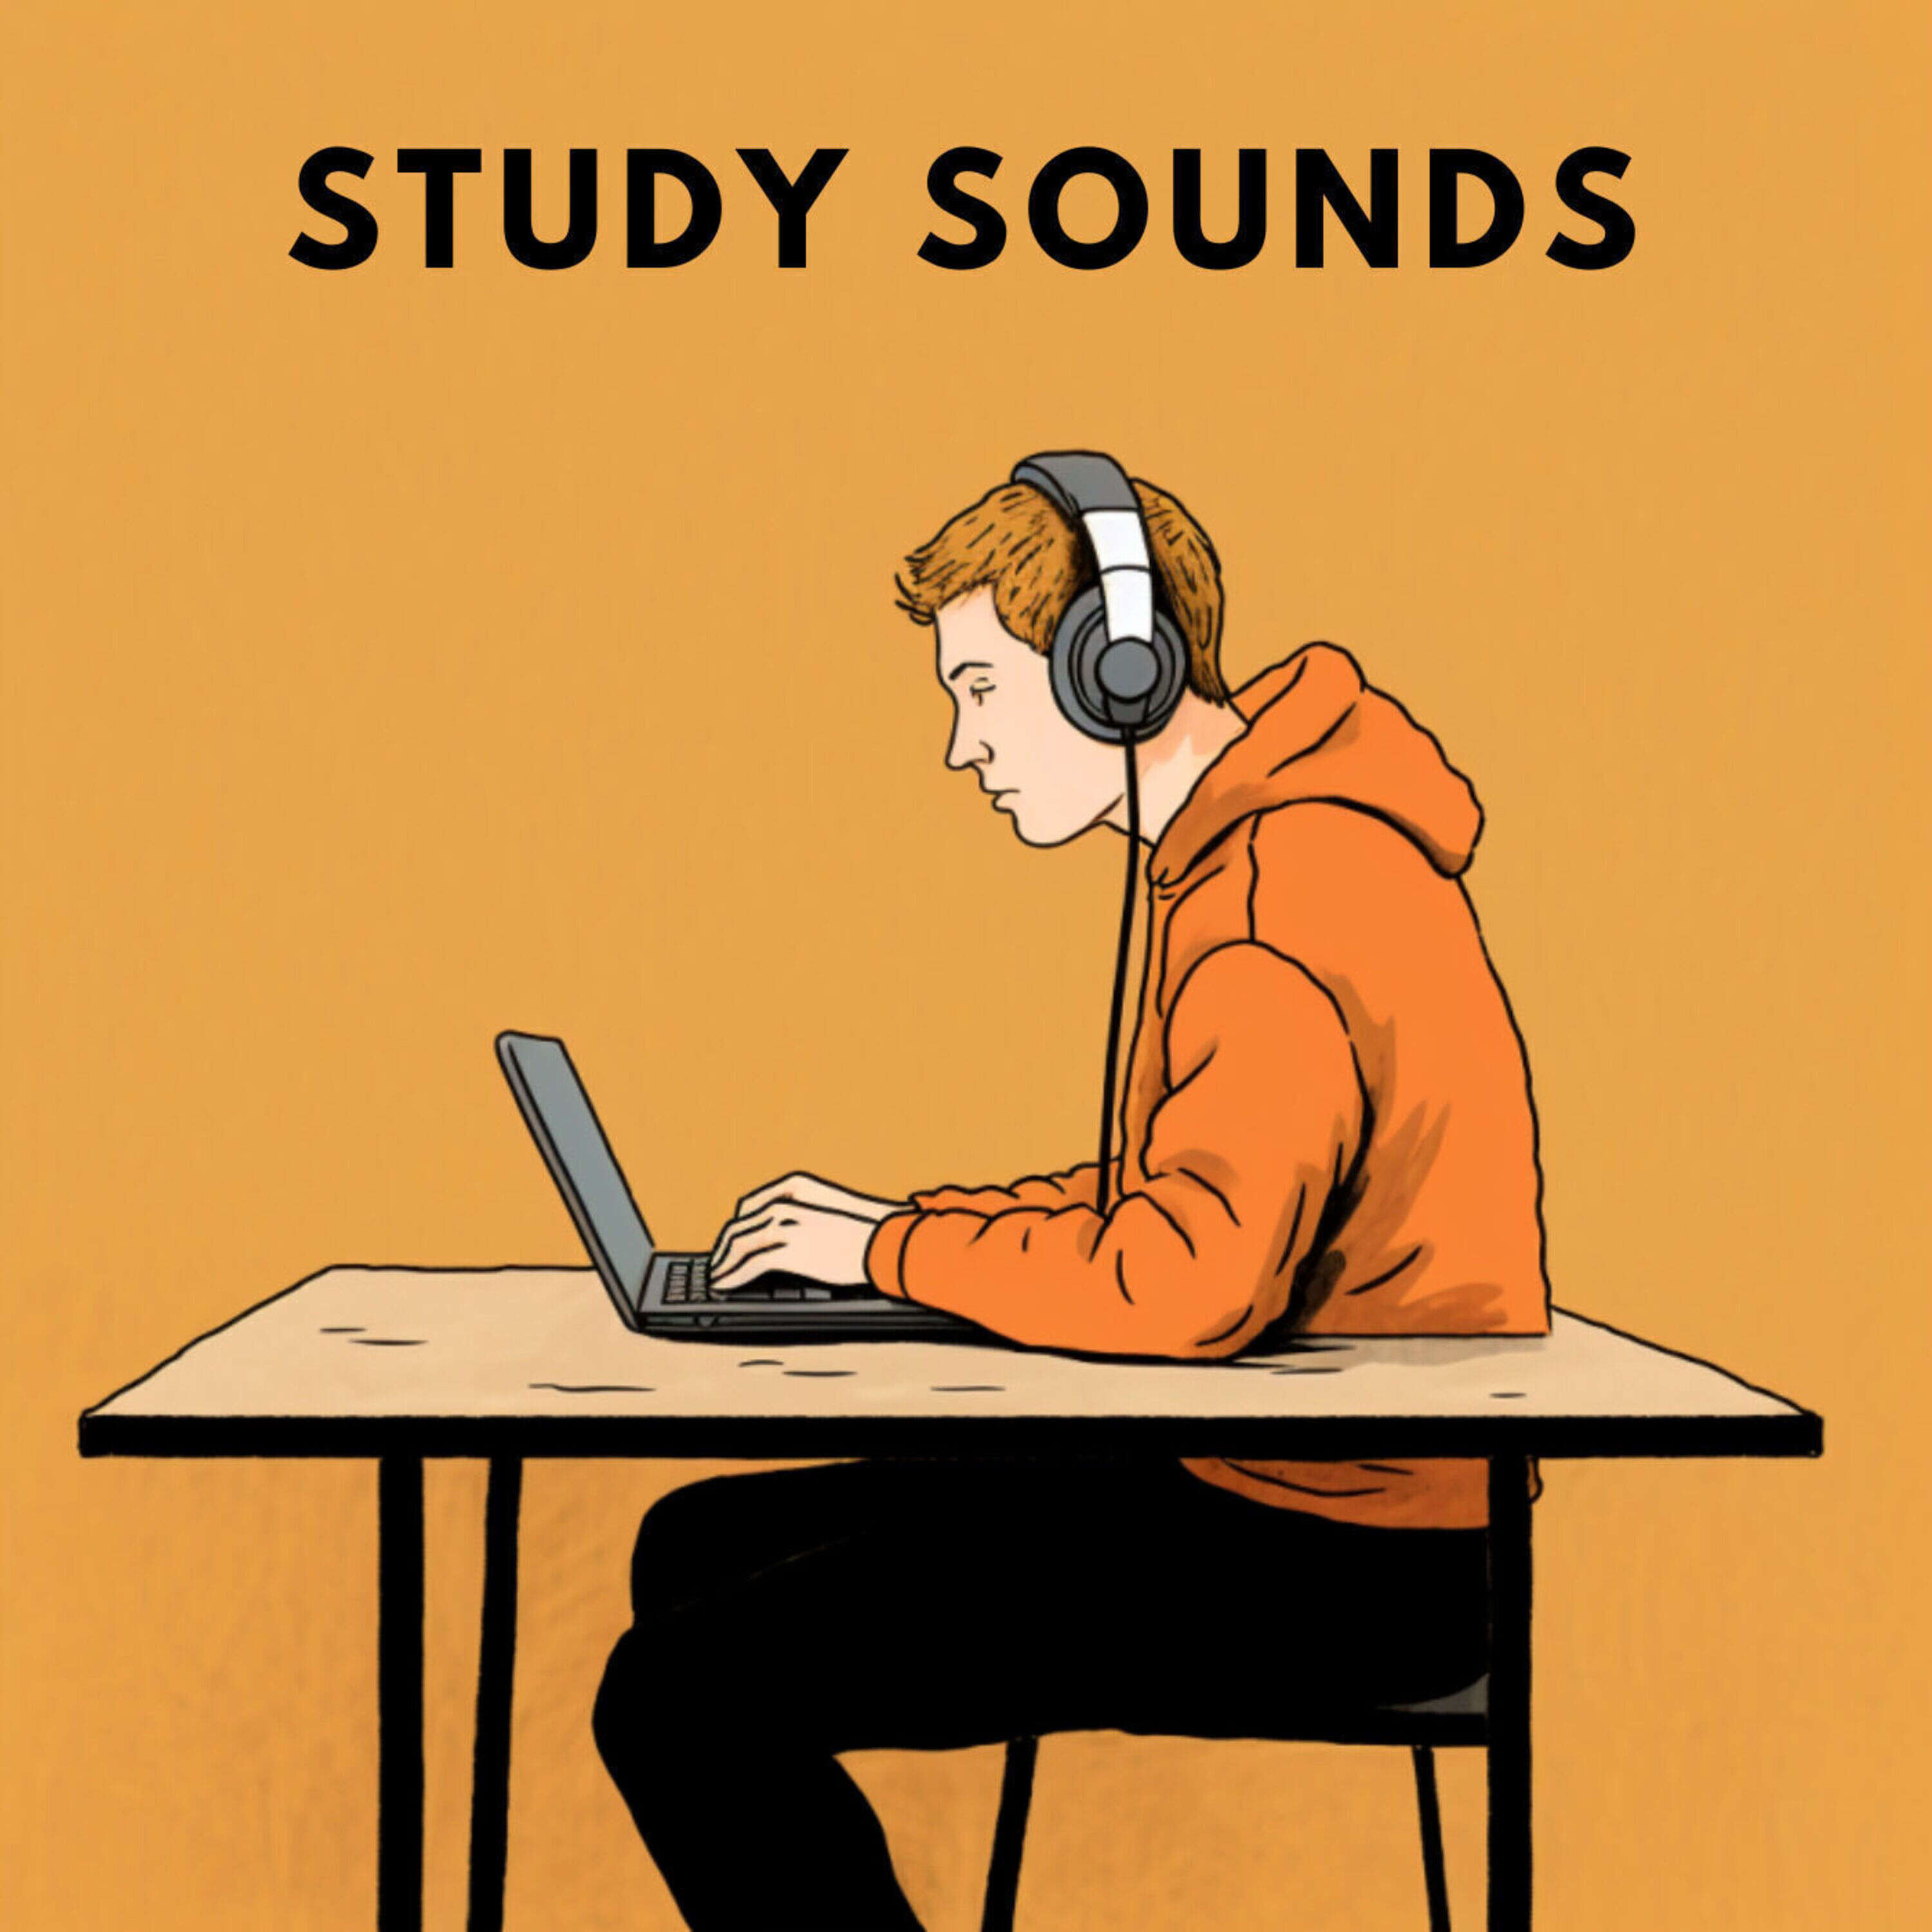 sounds For Studying, Concentration And Memory - 1 Hour Of Ambient Study sounds To Concentrate